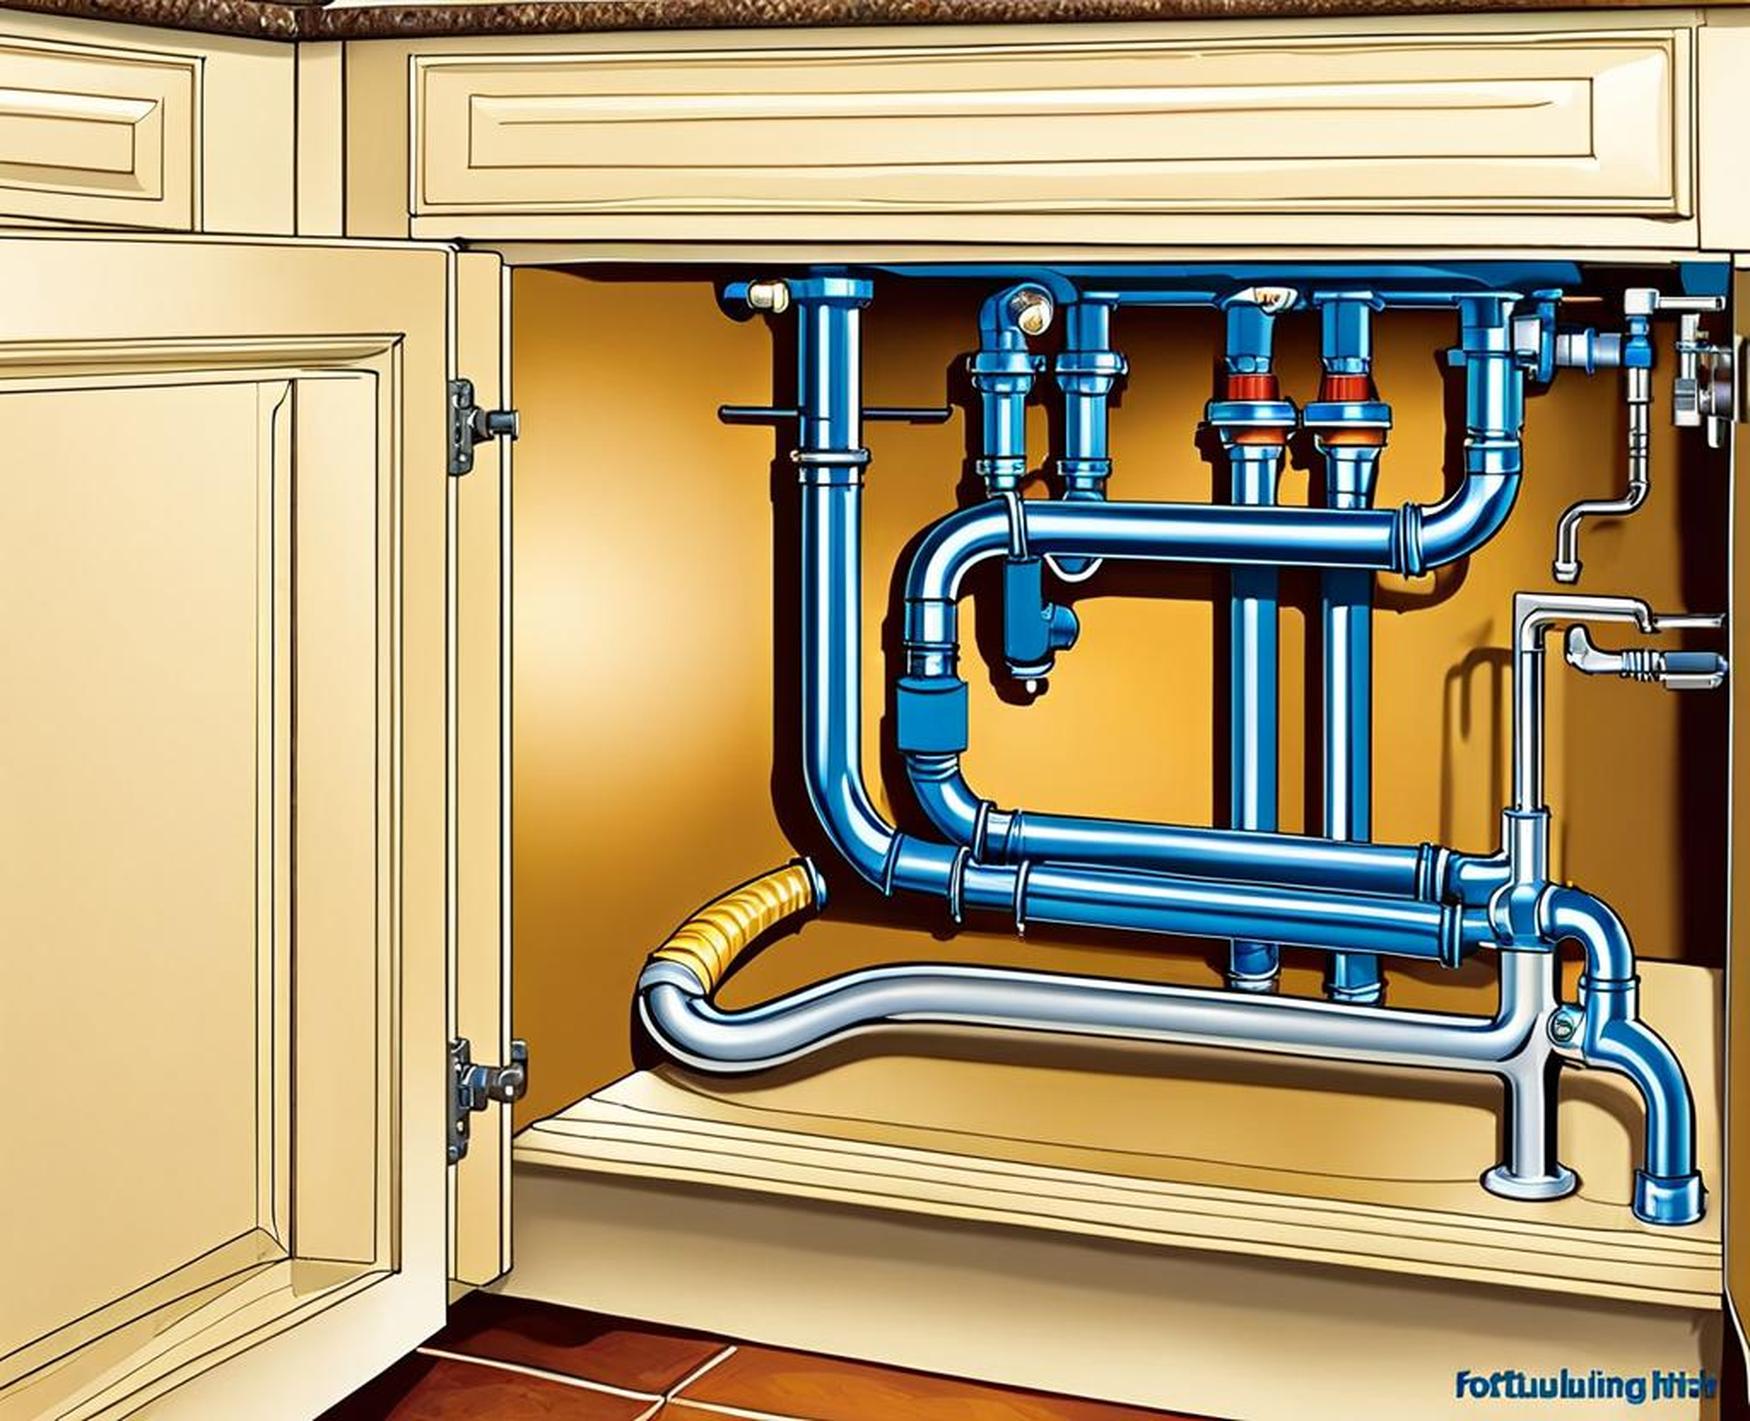 hot and cold water lines under the sink